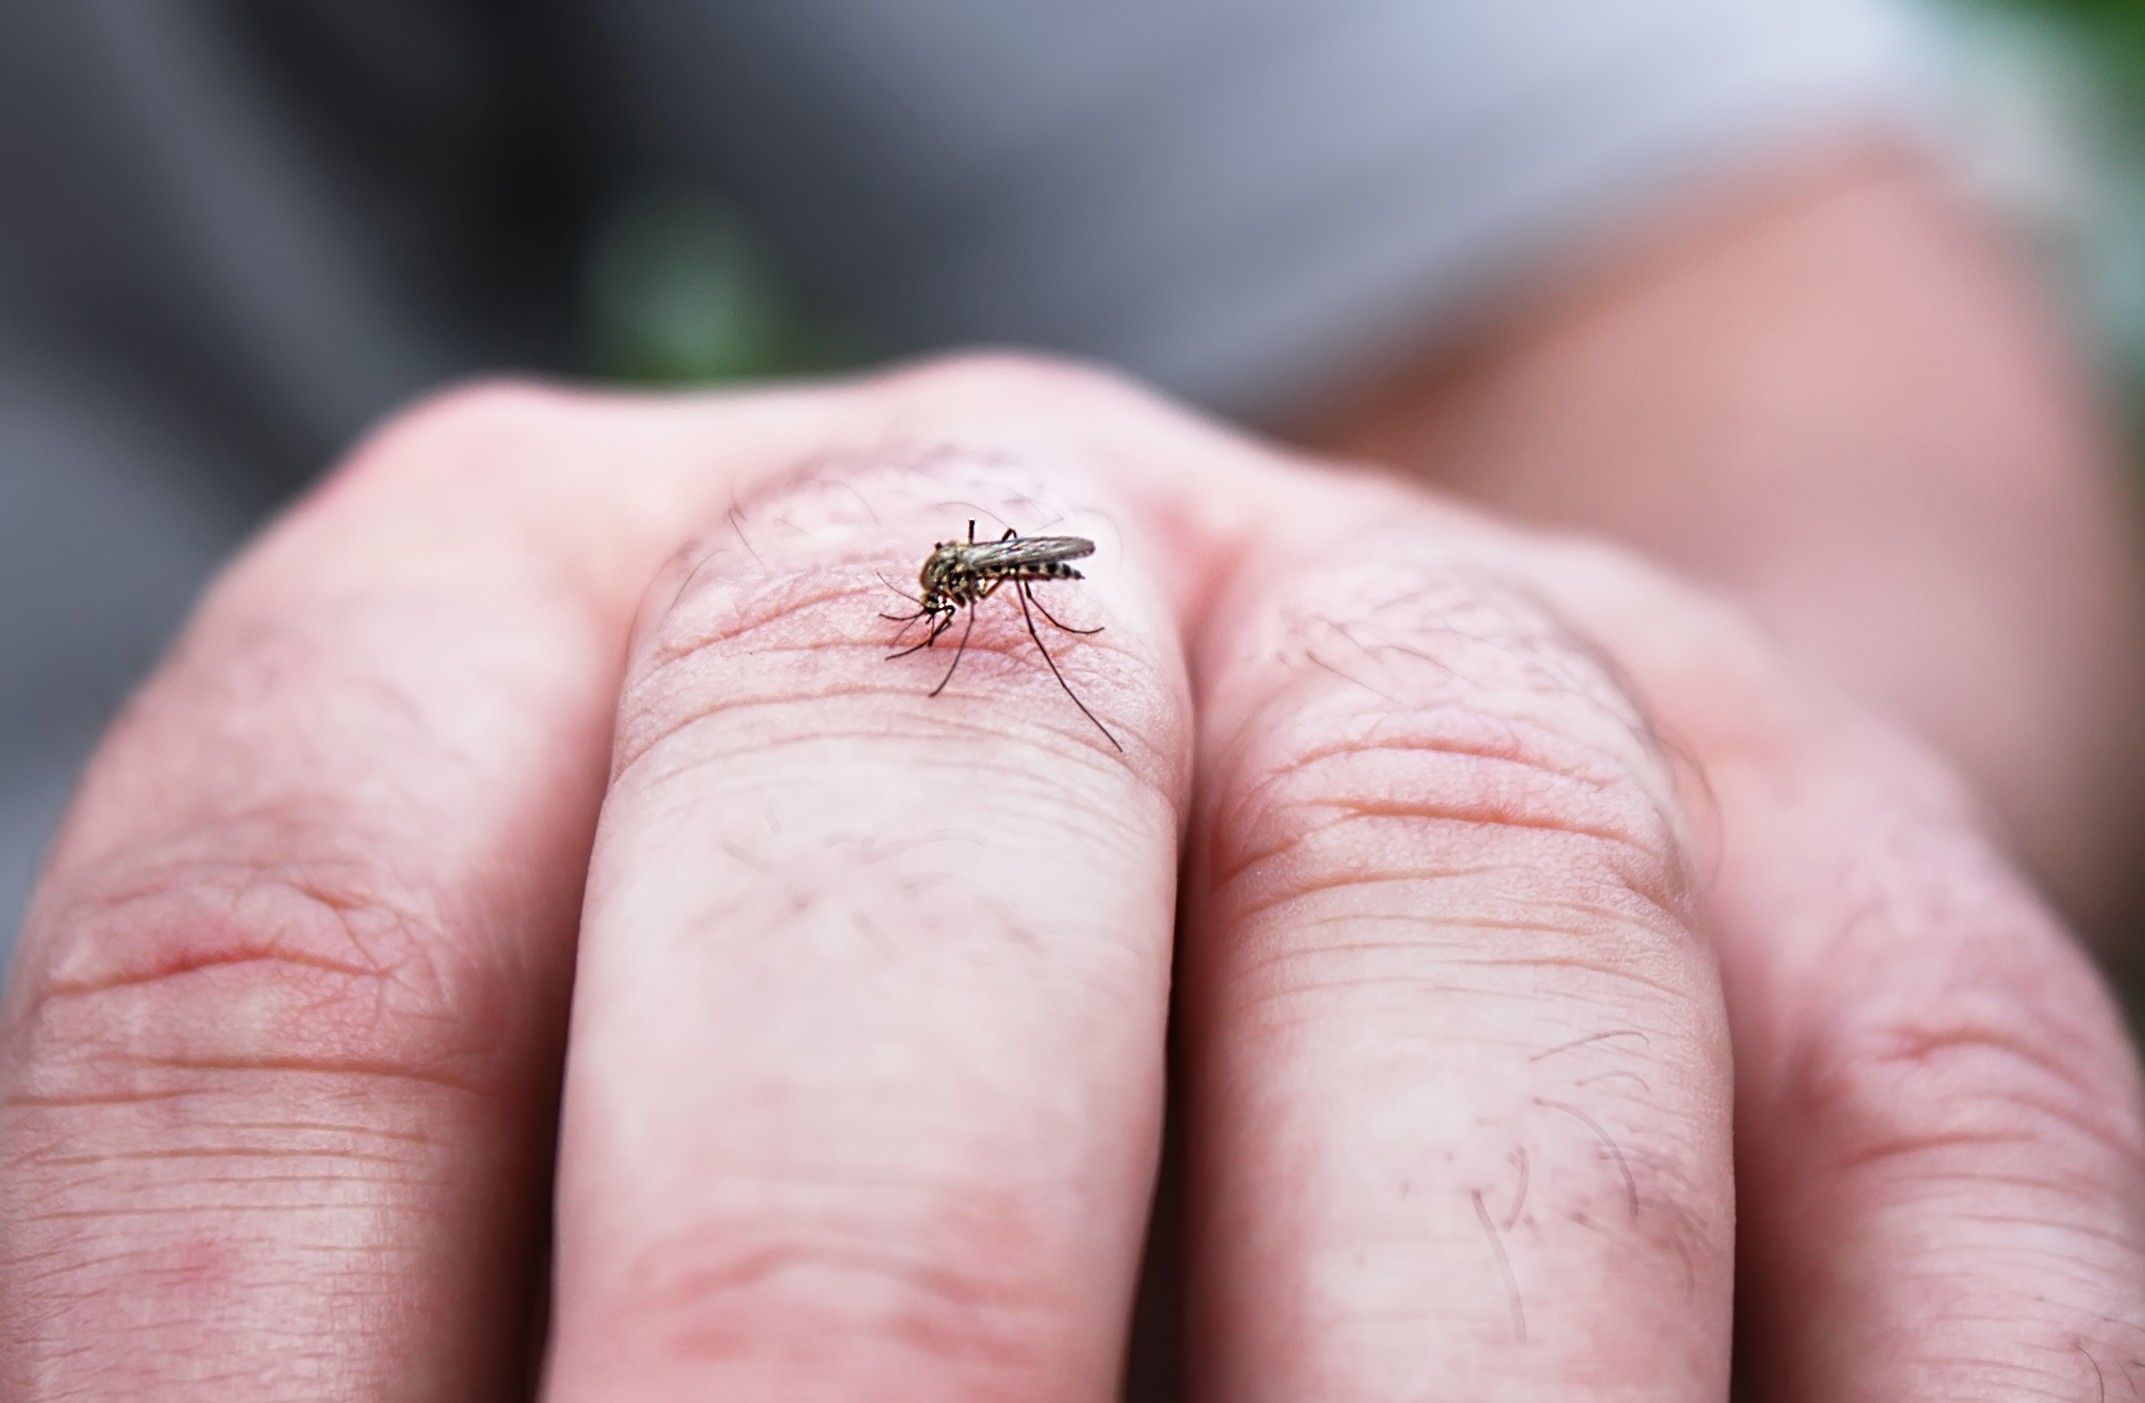 West Nile virus can spread to humans via mosquitos.